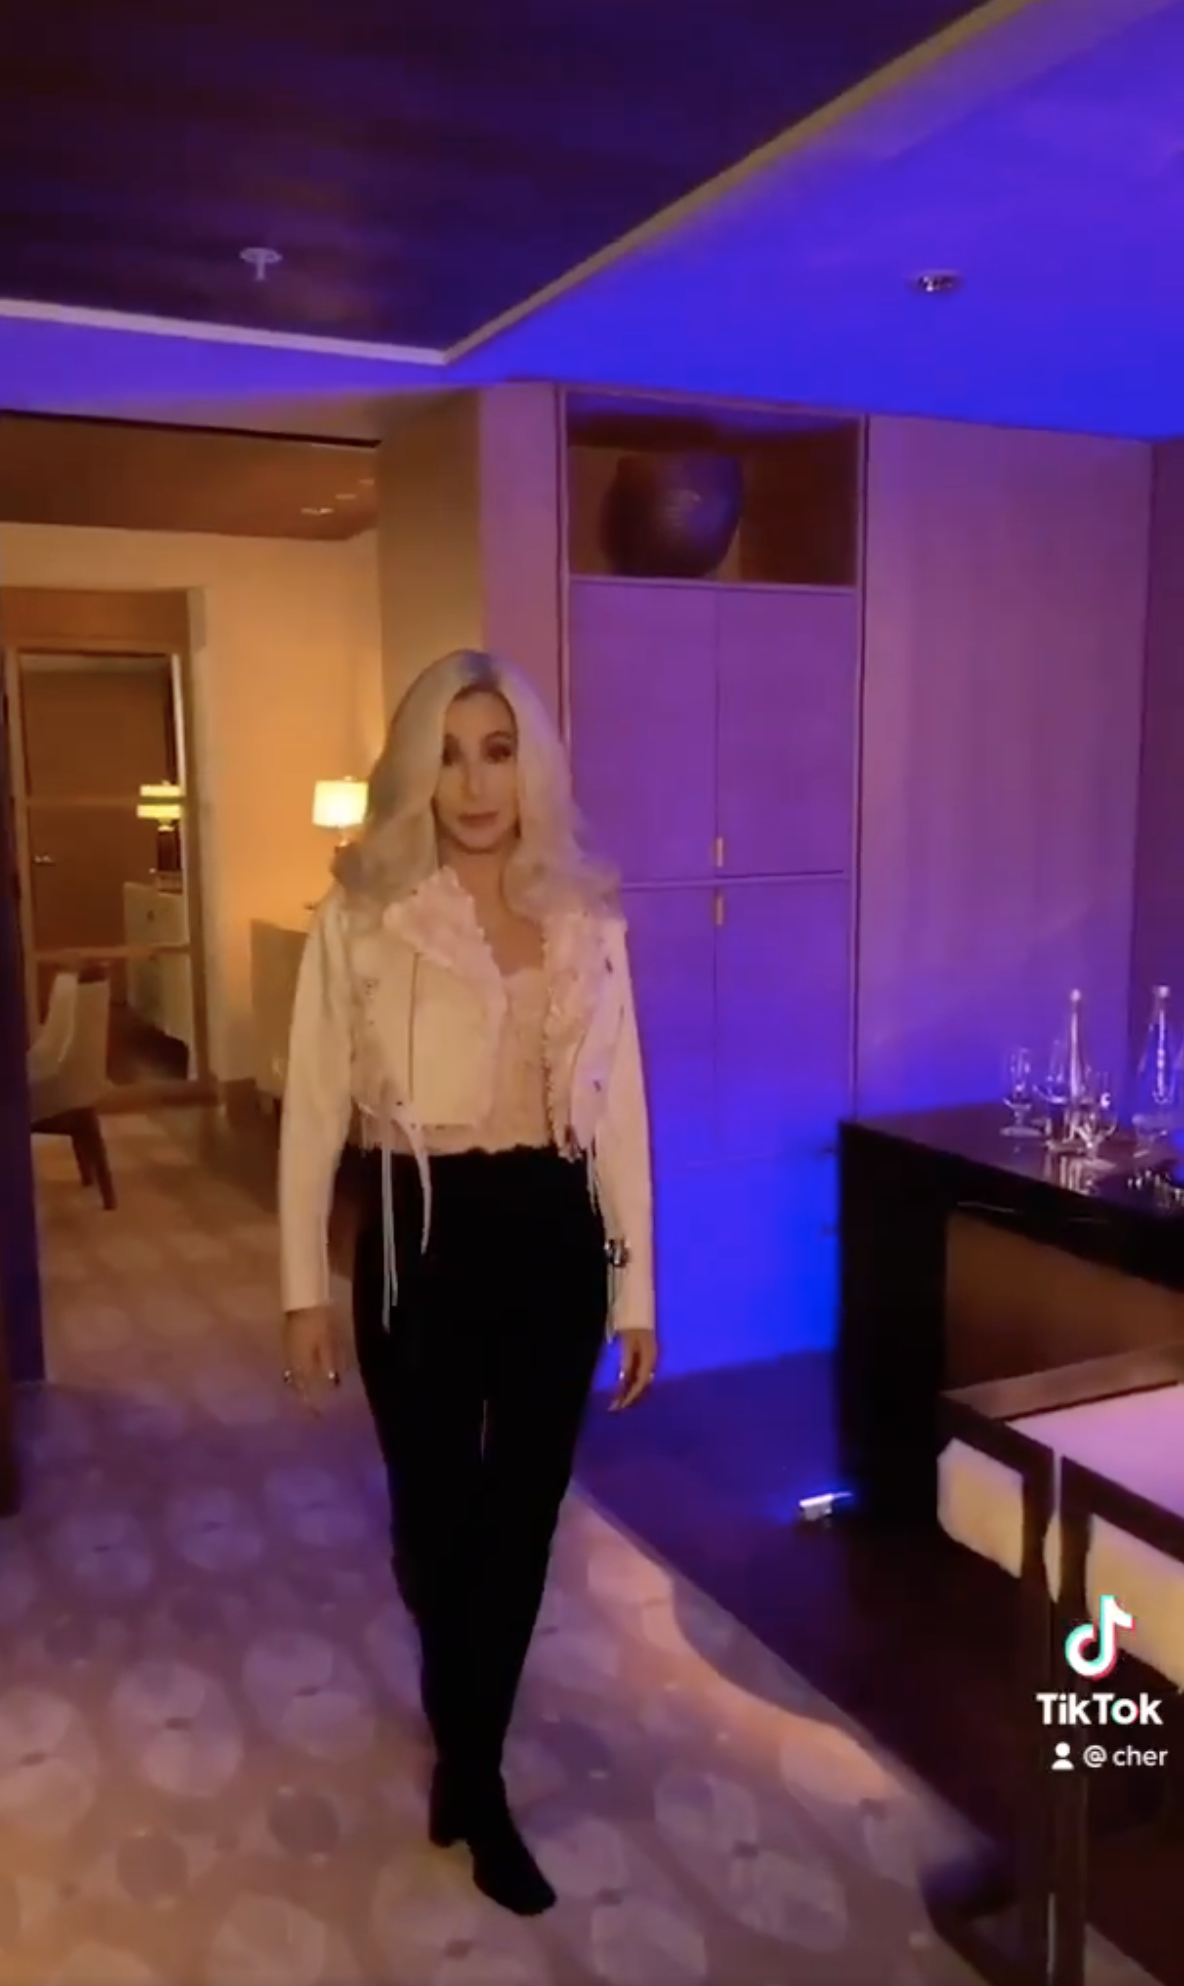 Cher again appears as a blonde in her first TikTok video